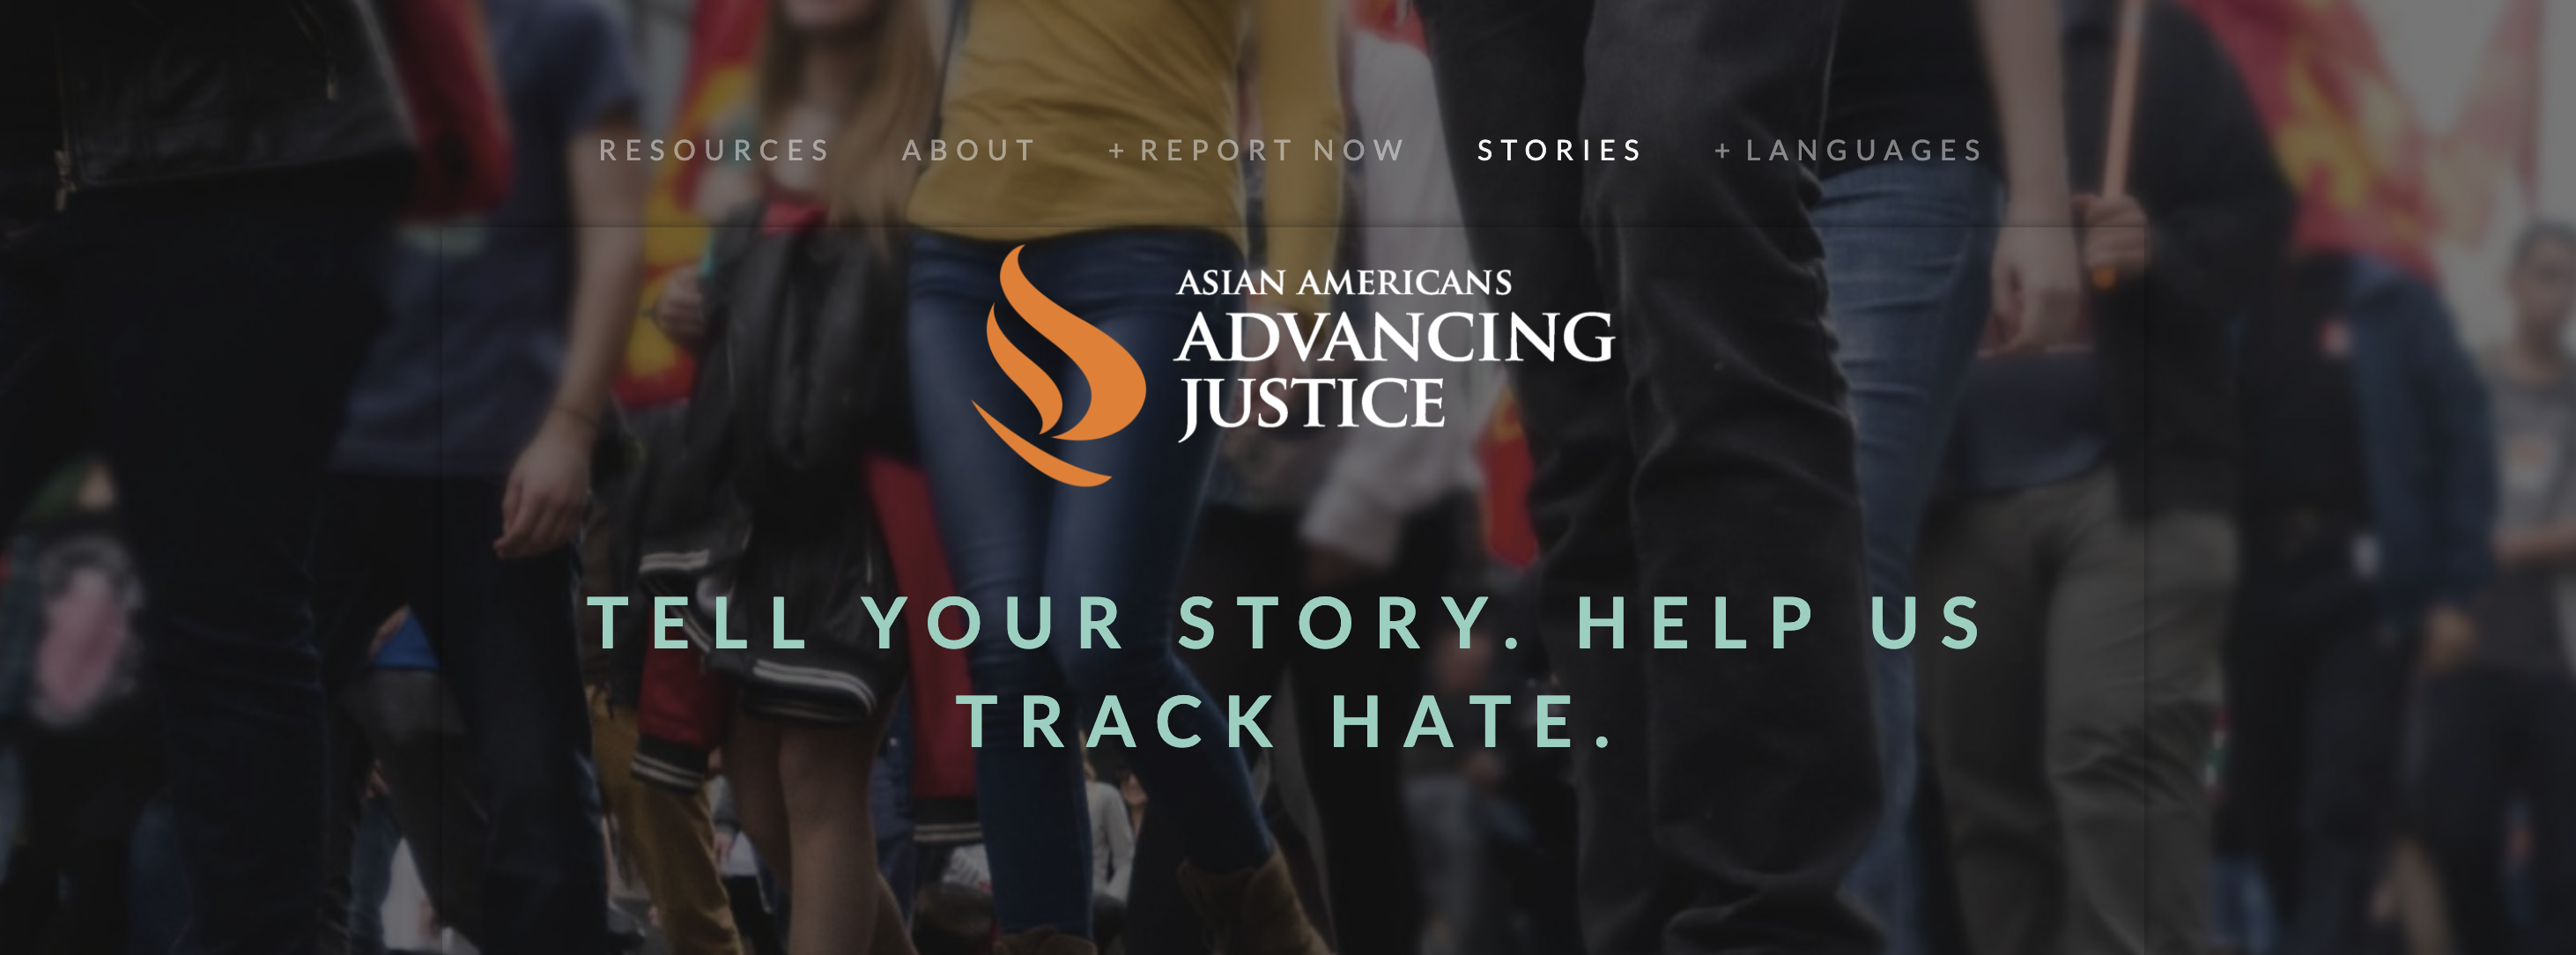 Asian Americans advancing justice website banner